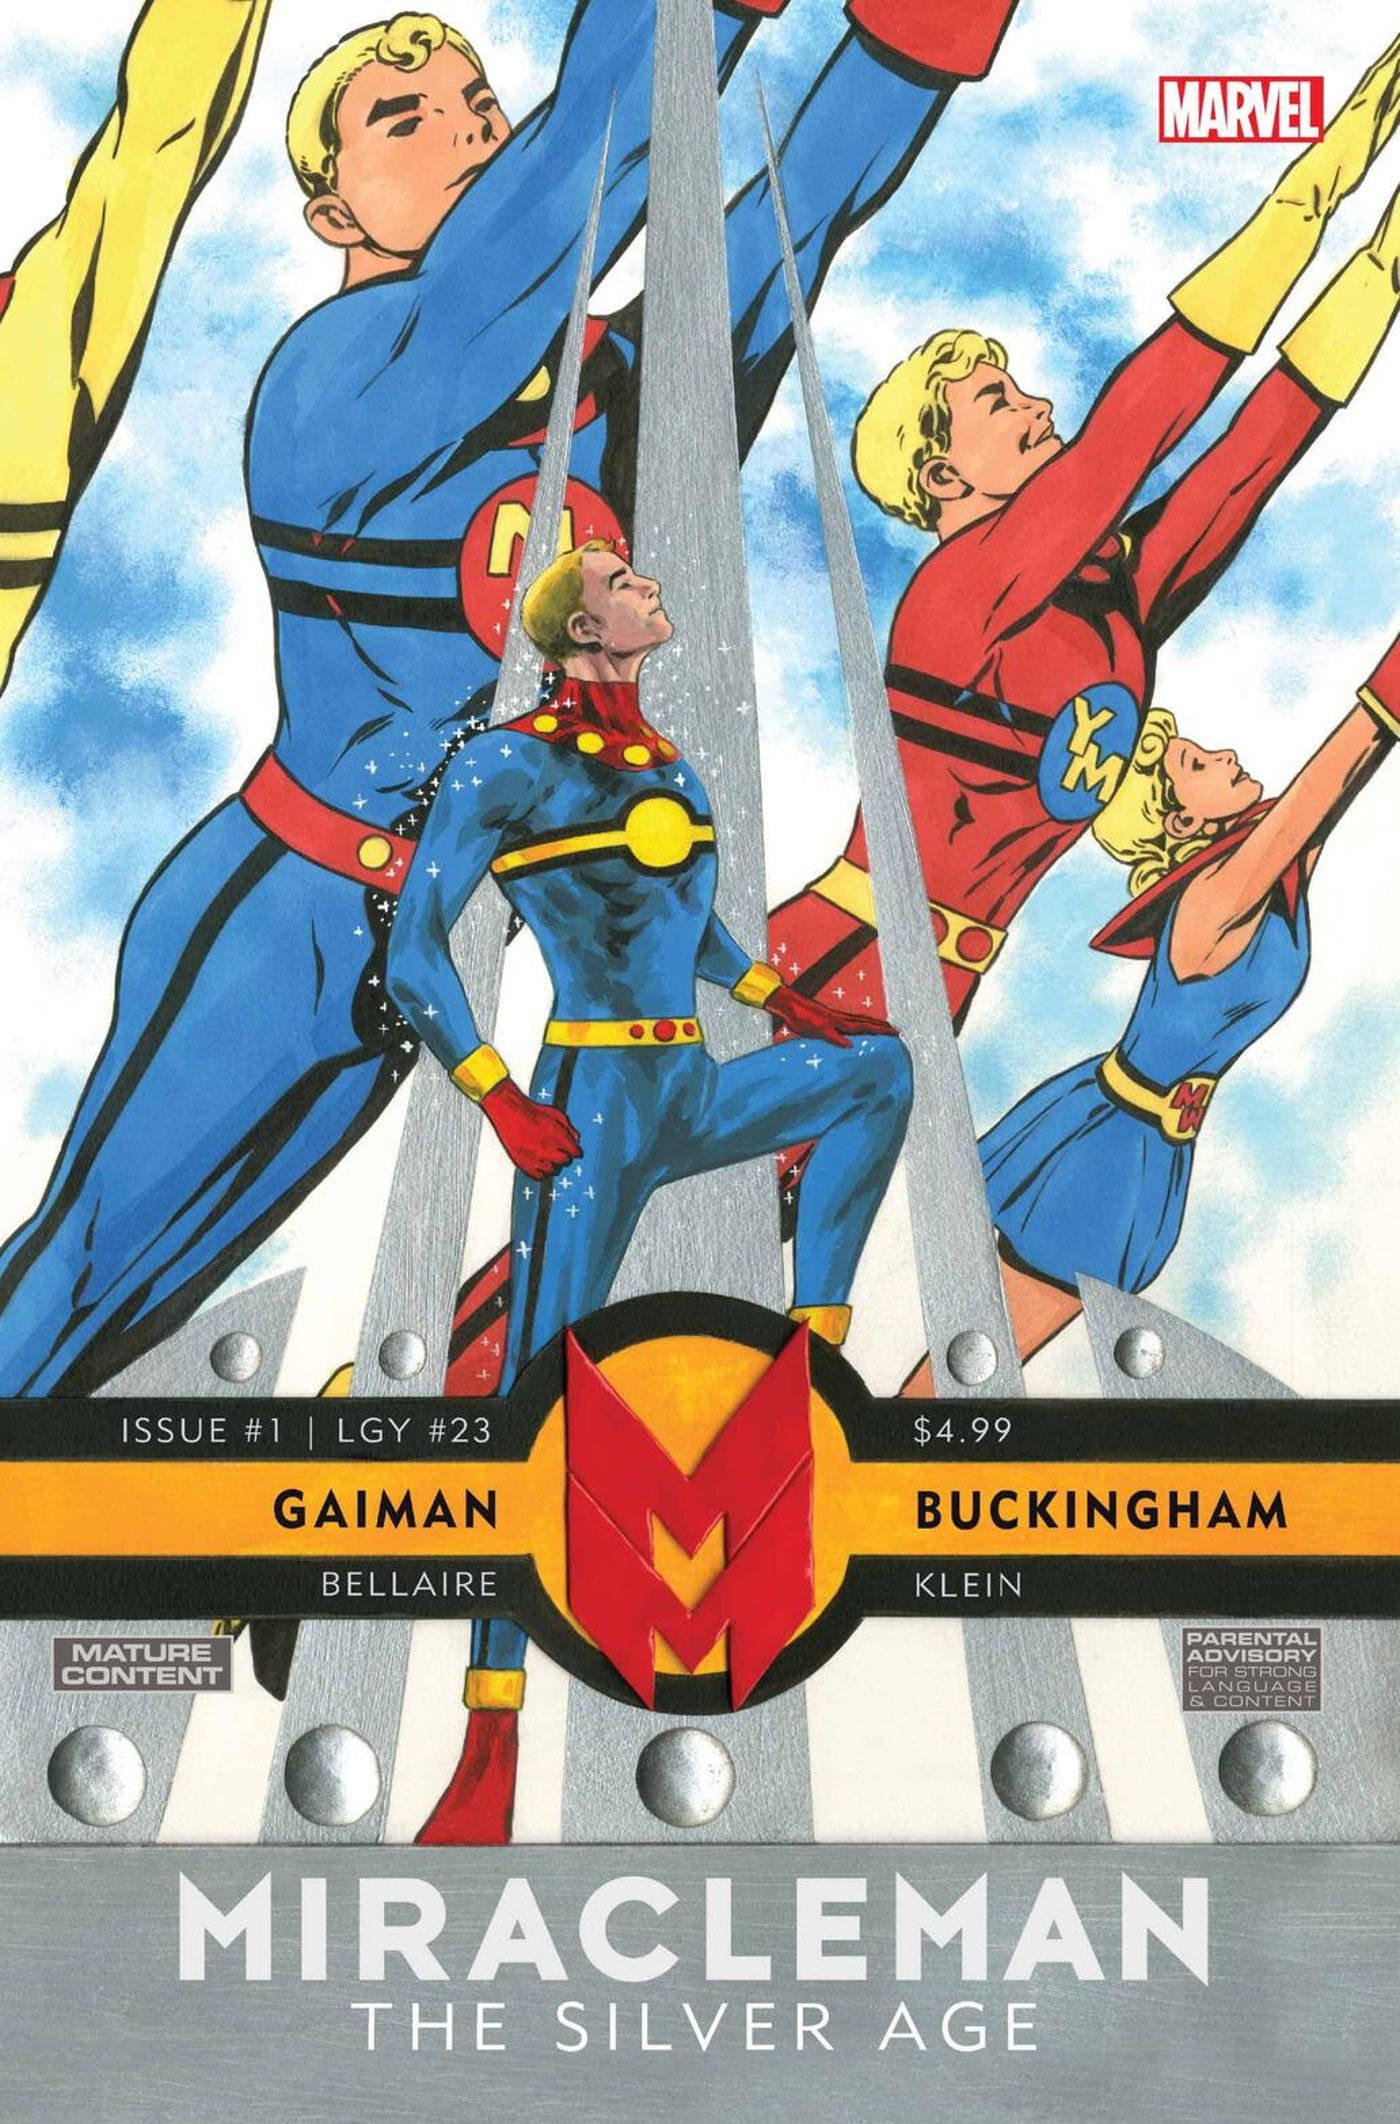 Marvel-Miracleman-cover-2